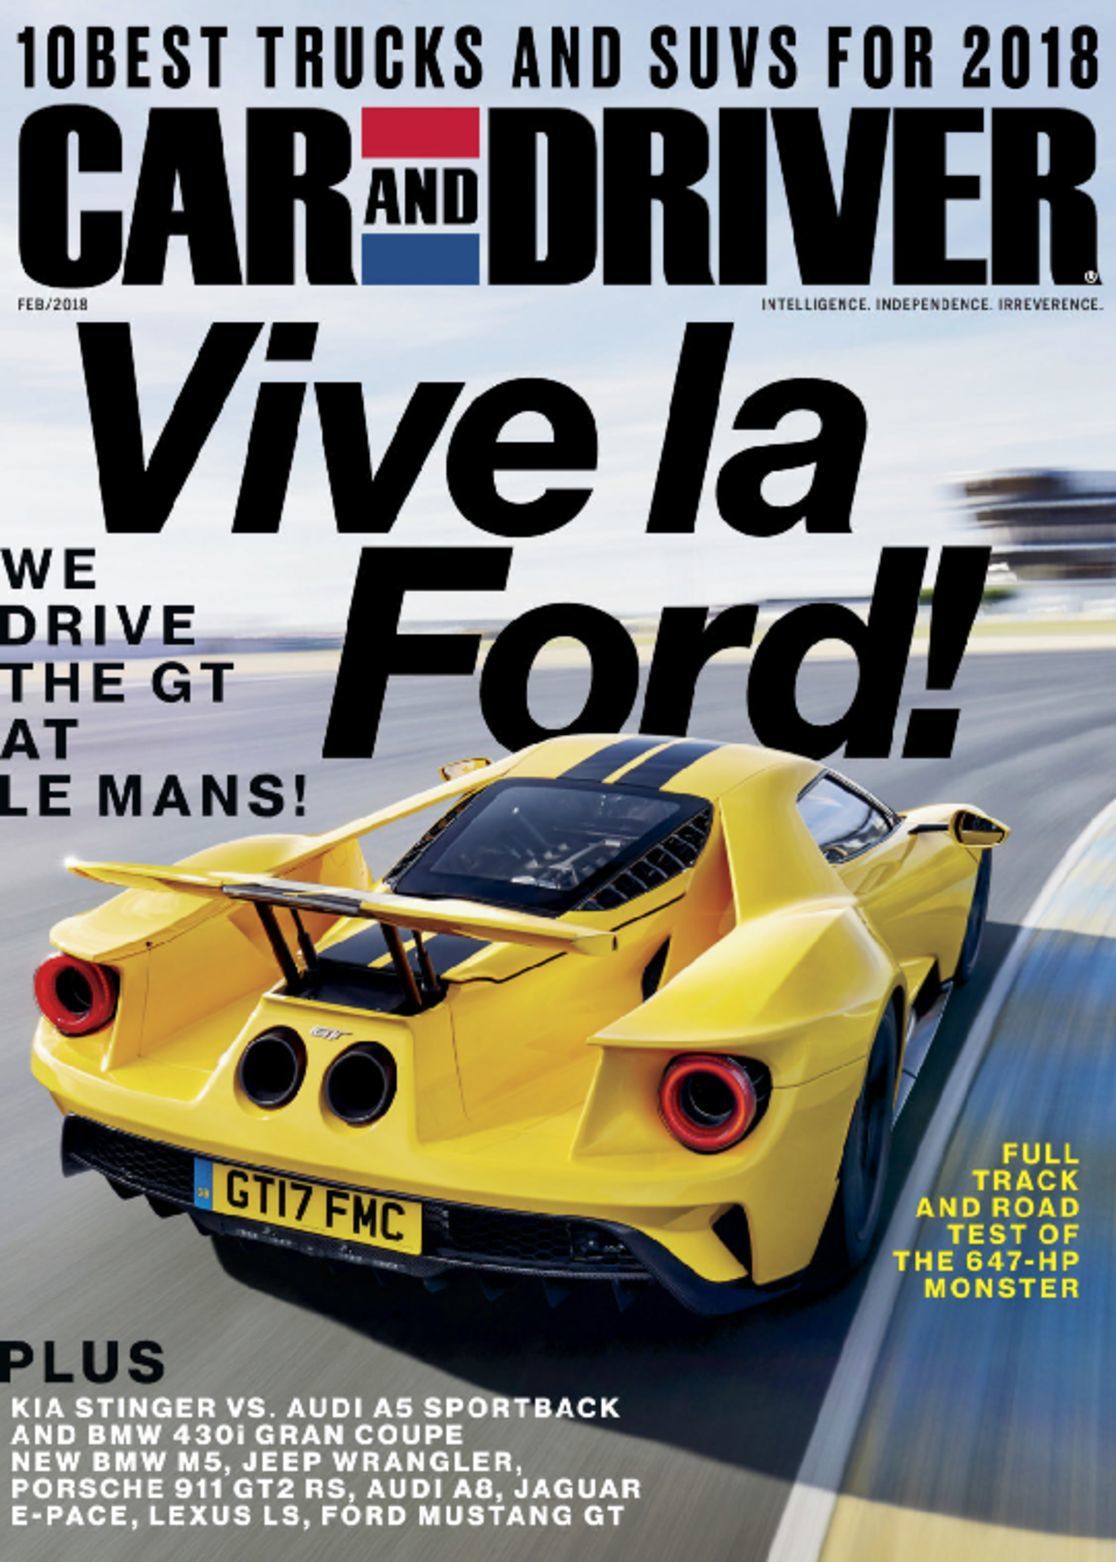 Car And Driver Magazine Intelligence Independence Irreverence